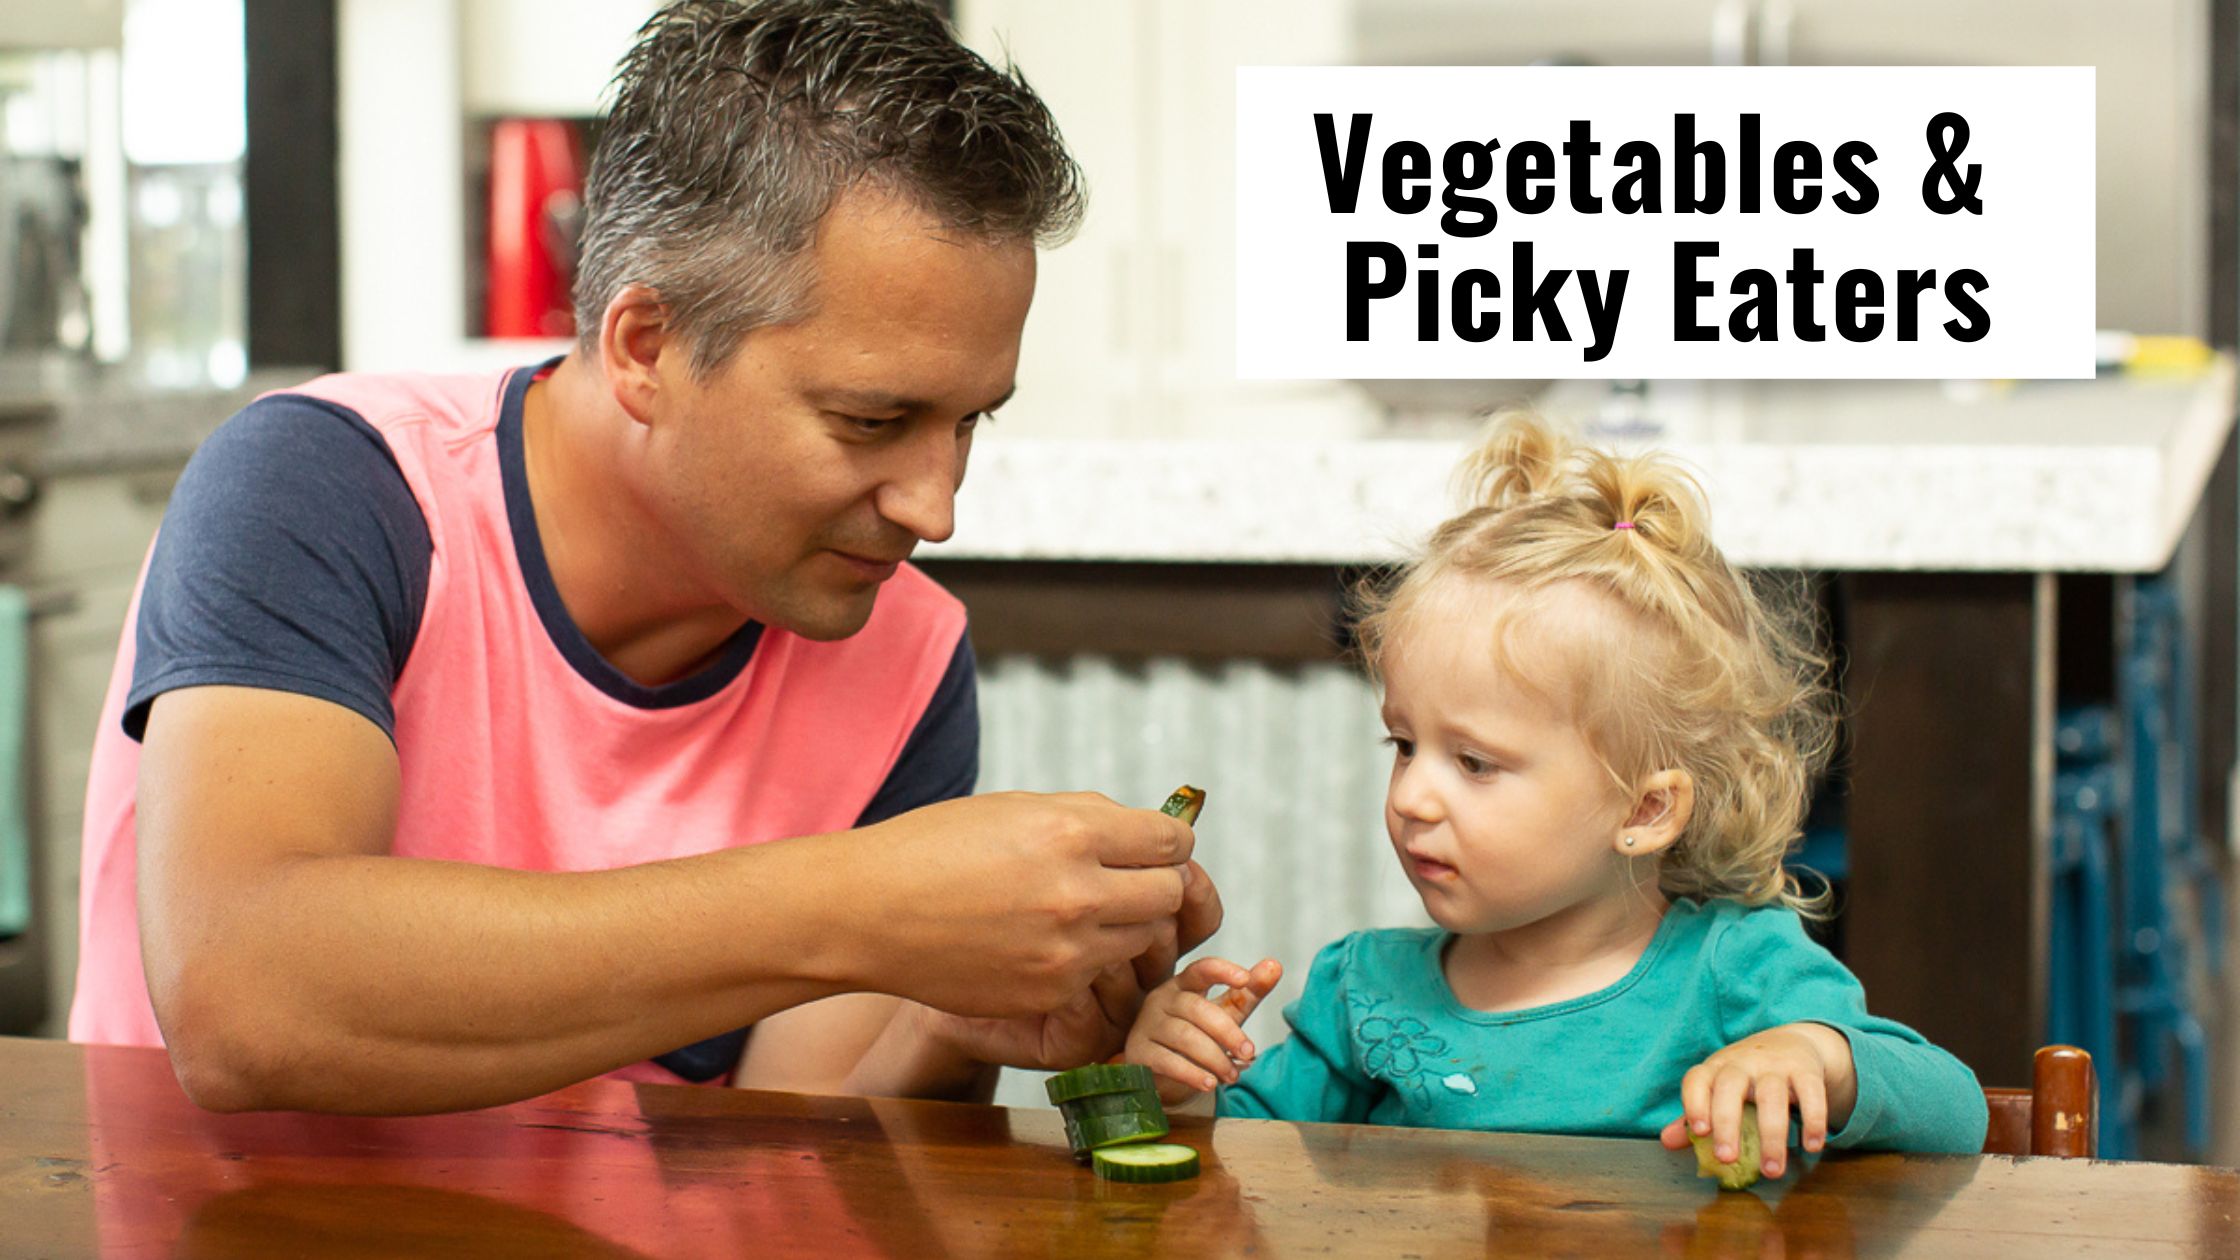 Picky eaters and vegetables- feeding a little girl a cucumber.